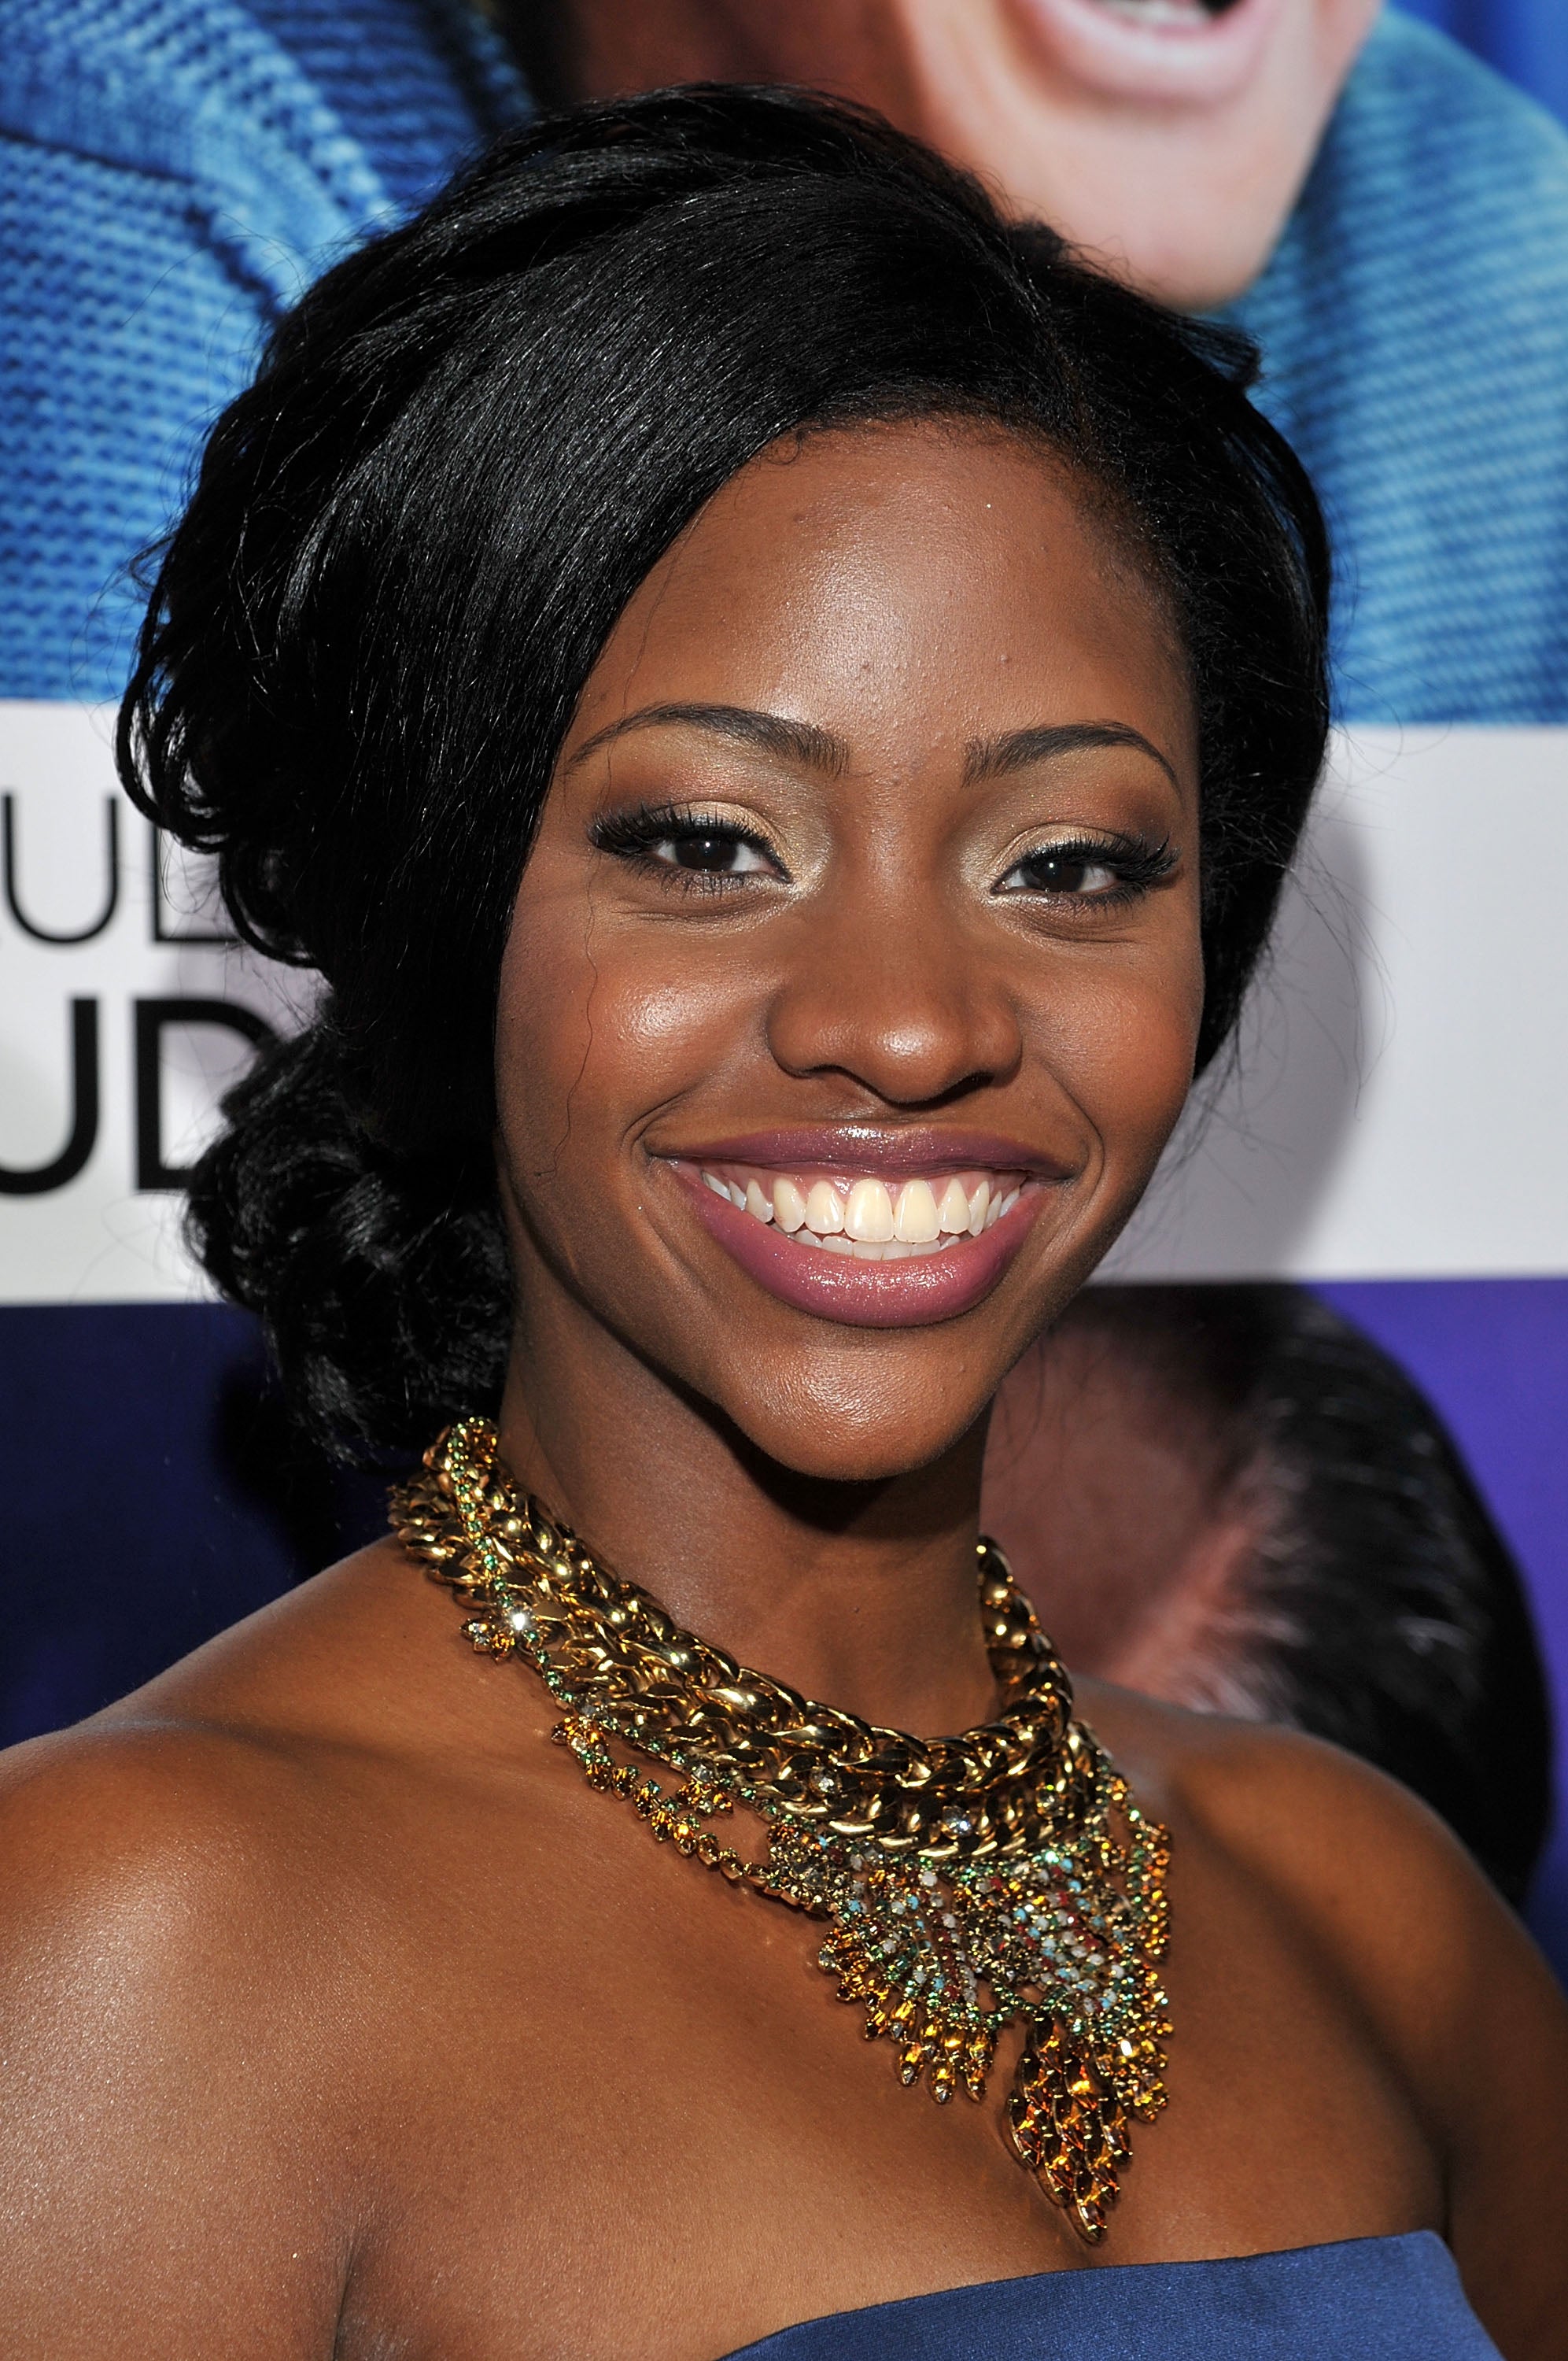 Teyonah Parris' Top 4 Reasons Why You Should Watch 'Mad Men'